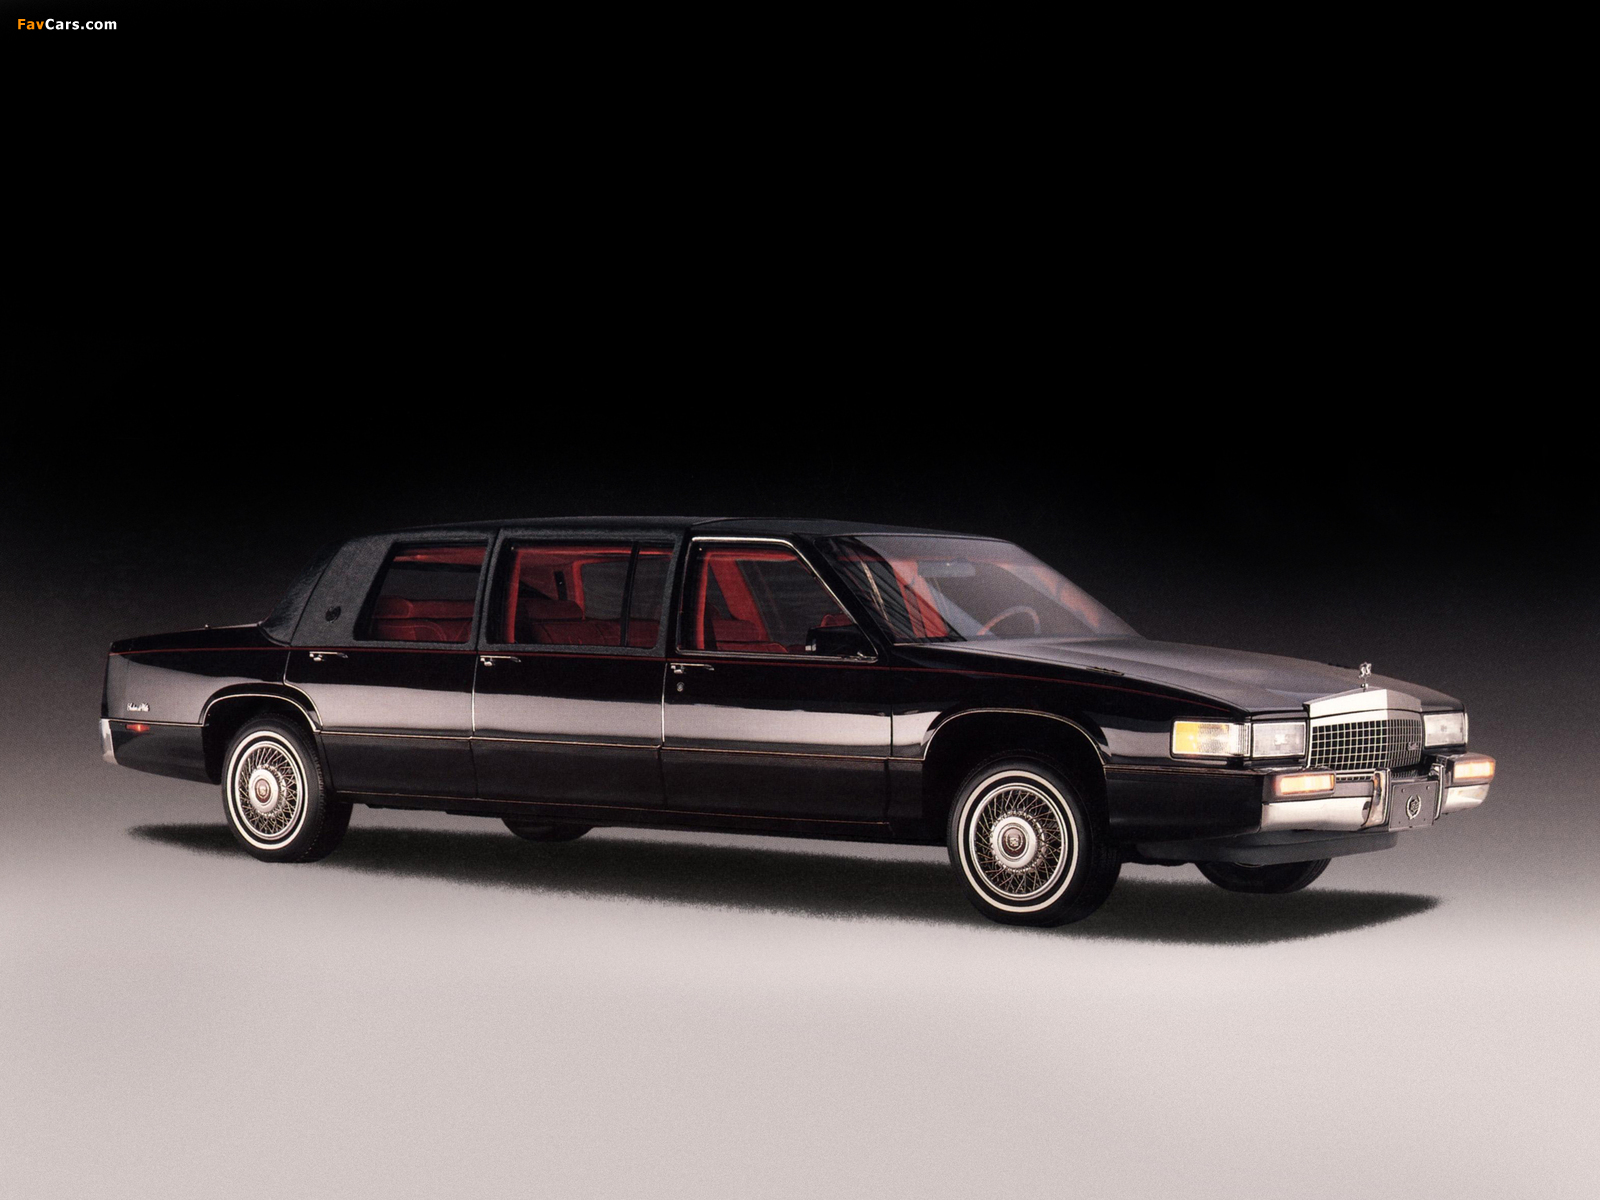 Pictures of Sayers & Scovill Cadillac DeVille Professional Limousine 1992 (1600 x 1200)